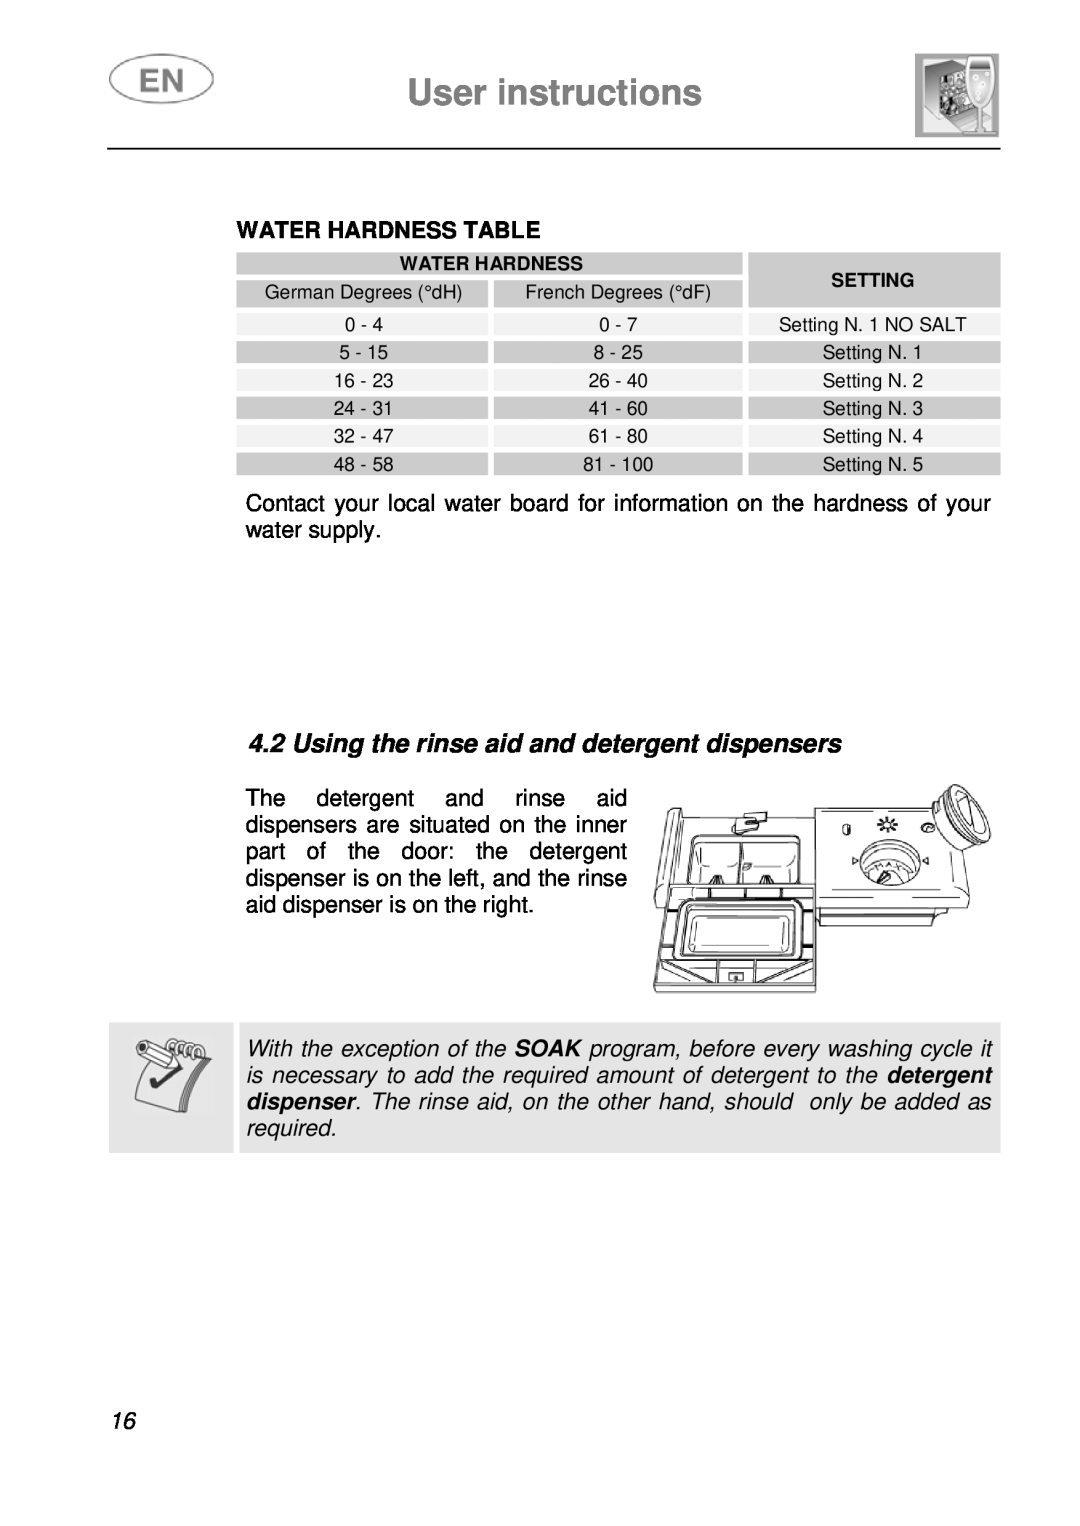 CDA WC460 manual User instructions, Using the rinse aid and detergent dispensers, Water Hardness Table 